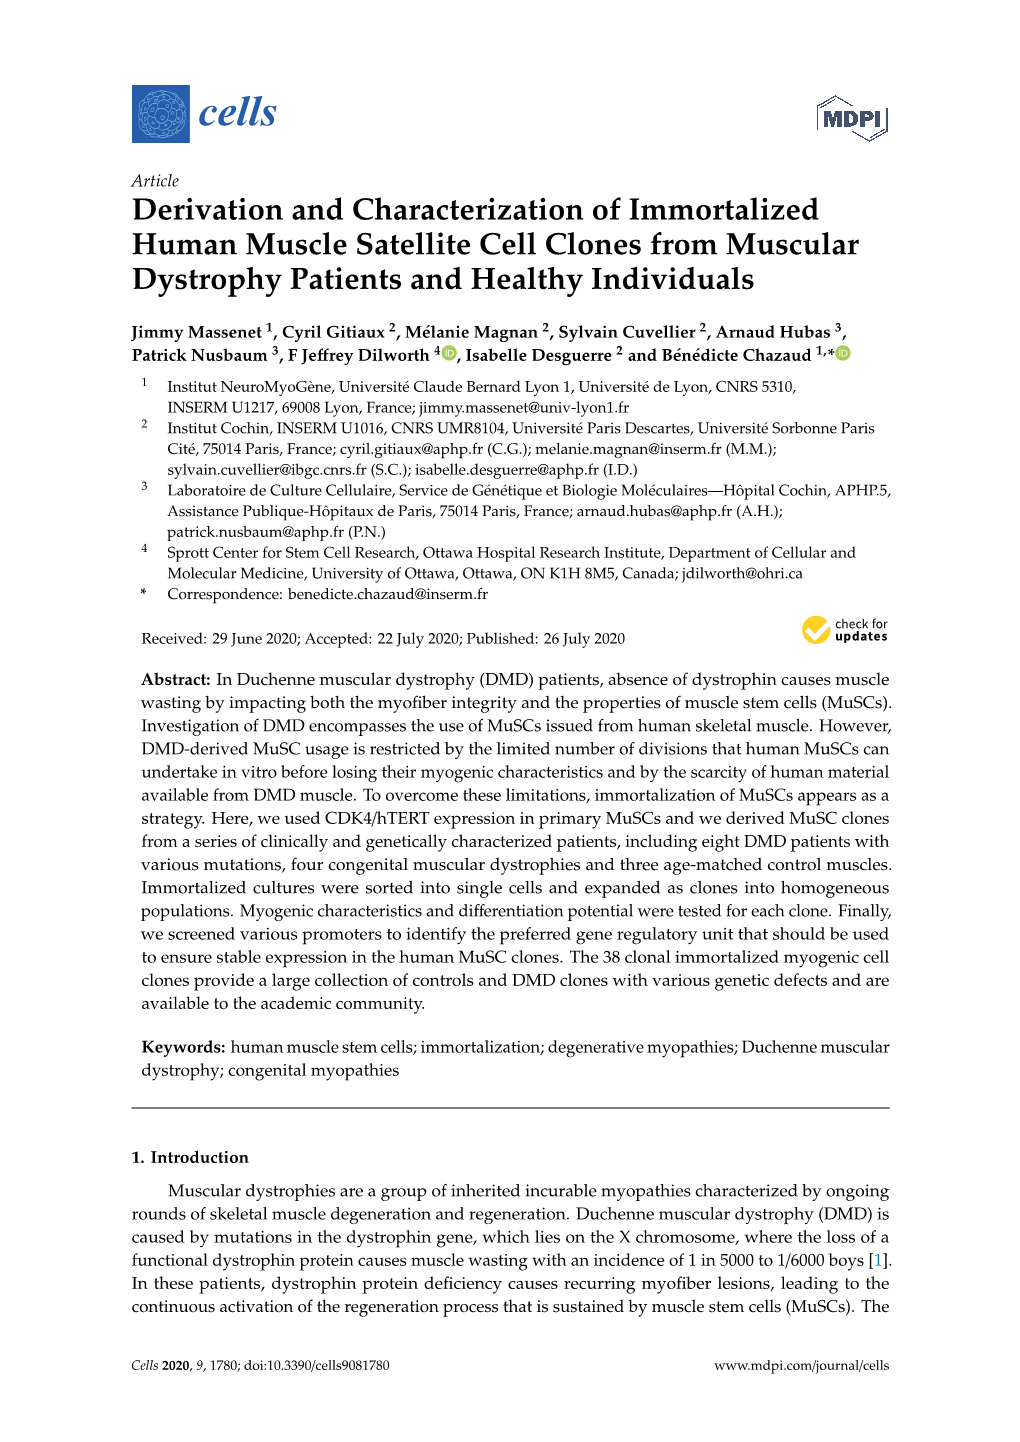 Derivation and Characterization of Immortalized Human Muscle Satellite Cell Clones from Muscular Dystrophy Patients and Healthy Individuals